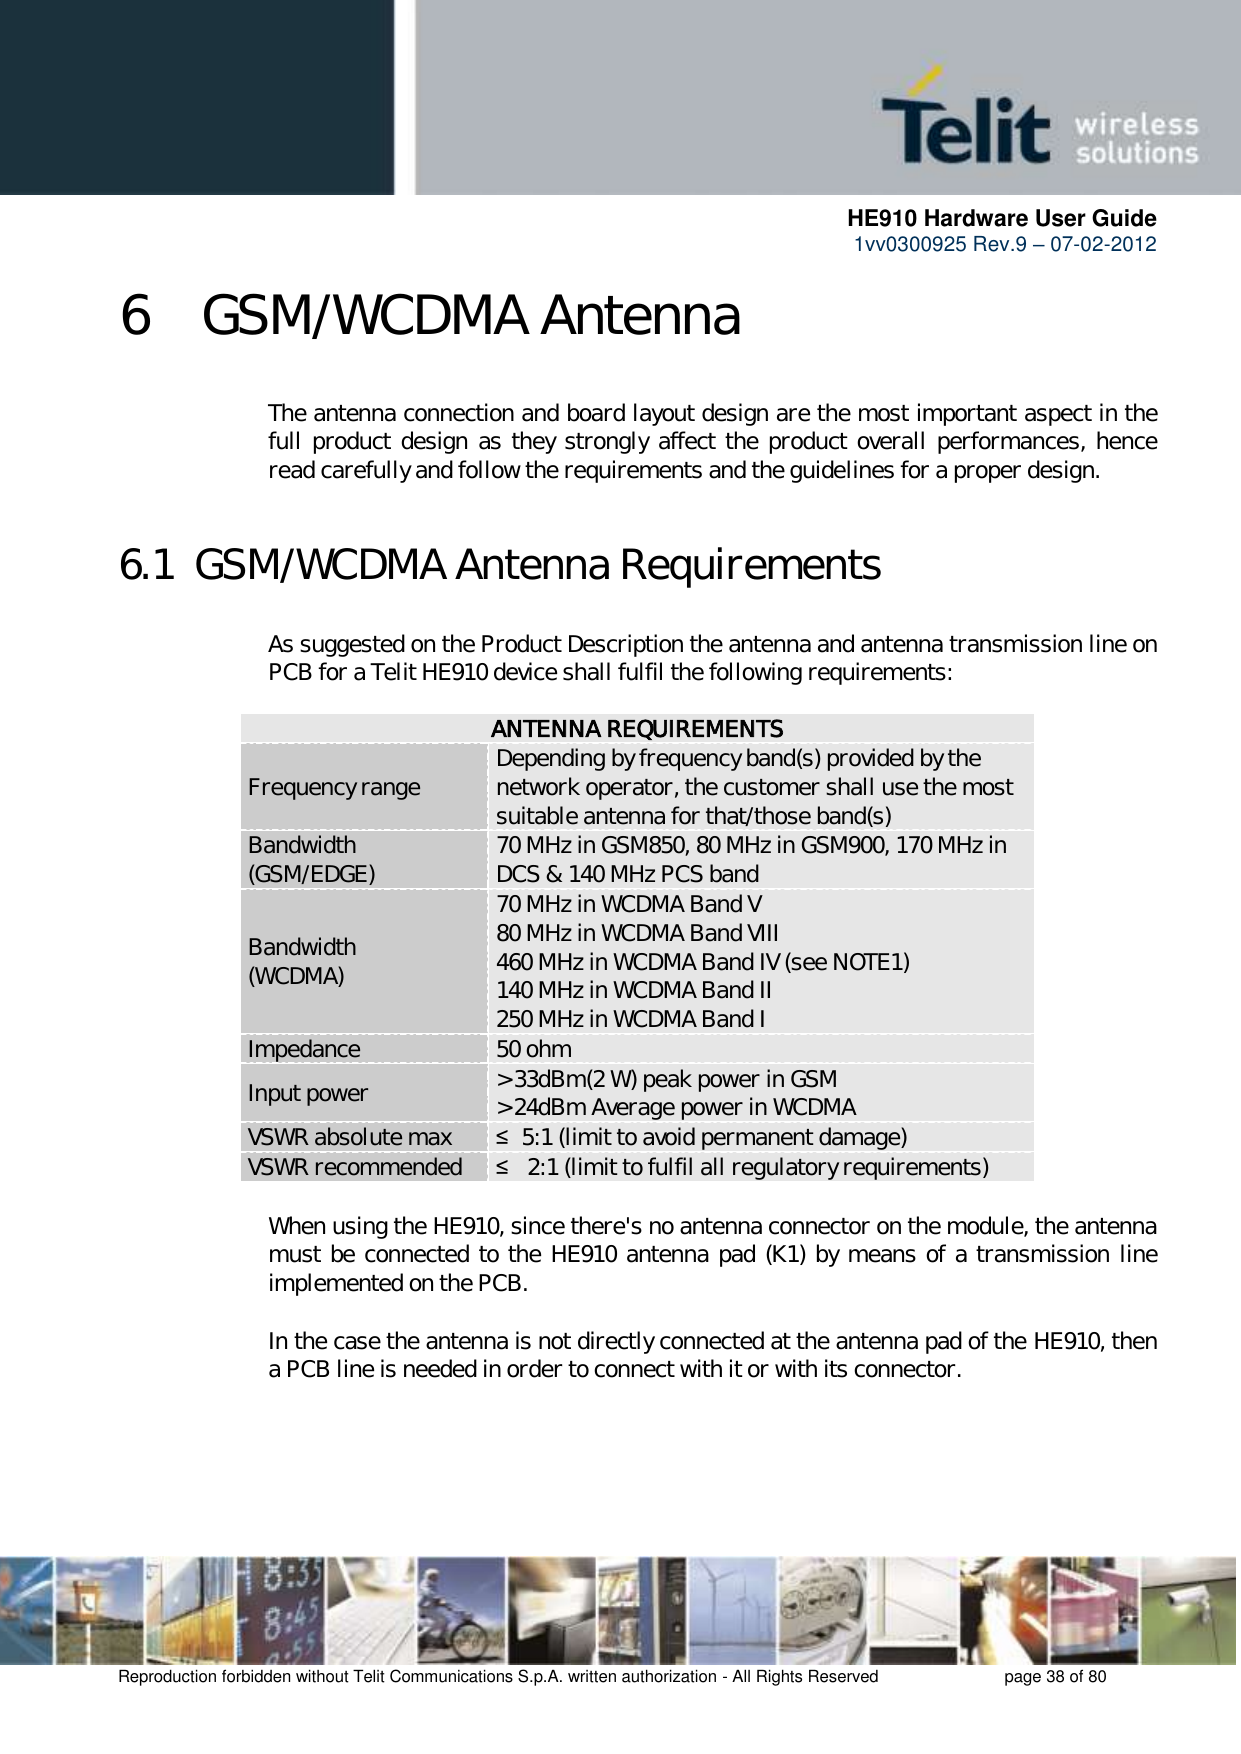      HE910 Hardware User Guide 1vv0300925 Rev.9 – 07-02-2012    Reproduction forbidden without Telit Communications S.p.A. written authorization - All Rights Reserved    page 38 of 80  6 GSM/WCDMA Antenna The antenna connection and board layout design are the most important aspect in the full product design as they strongly affect the product overall performances, hence read carefully and follow the requirements and the guidelines for a proper design.  6.1  GSM/WCDMA Antenna Requirements As suggested on the Product Description the antenna and antenna transmission line on PCB for a Telit HE910 device shall fulfil the following requirements:   ANTENNA REQUIREMENTS Frequency range Depending by frequency band(s) provided by the network operator, the customer shall use the most suitable antenna for that/those band(s) Bandwidth (GSM/EDGE) 70 MHz in GSM850, 80 MHz in GSM900, 170 MHz in DCS &amp; 140 MHz PCS band Bandwidth  (WCDMA) 70 MHz in WCDMA Band V 80 MHz in WCDMA Band VIII 460 MHz in WCDMA Band IV (see NOTE1) 140 MHz in WCDMA Band II 250 MHz in WCDMA Band I Impedance 50 ohm Input power &gt; 33dBm(2 W) peak power in GSM &gt; 24dBm Average power in WCDMA VSWR absolute max ≤  5:1 (limit to avoid permanent damage) VSWR recommended ≤   2:1 (limit to fulfil all regulatory requirements)  When using the HE910, since there&apos;s no antenna connector on the module, the antenna must be connected to the HE910 antenna pad (K1) by means of a transmission line implemented on the PCB.  In the case the antenna is not directly connected at the antenna pad of the HE910, then a PCB line is needed in order to connect with it or with its connector.   